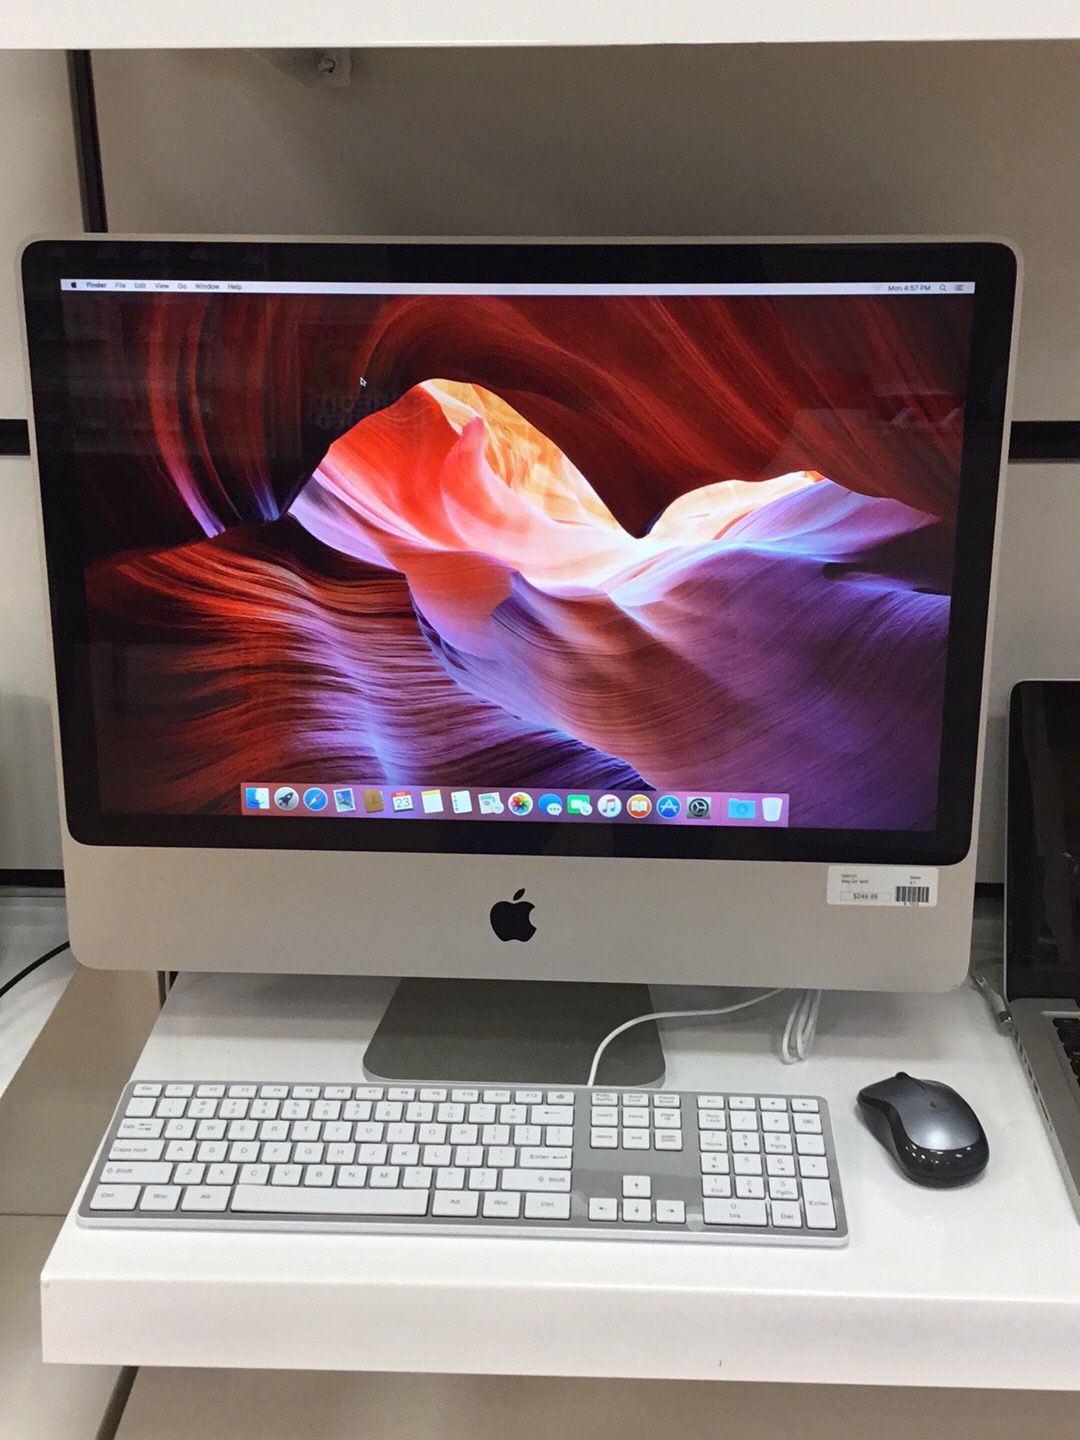 24” iMac 120GB SSD in excellent condition